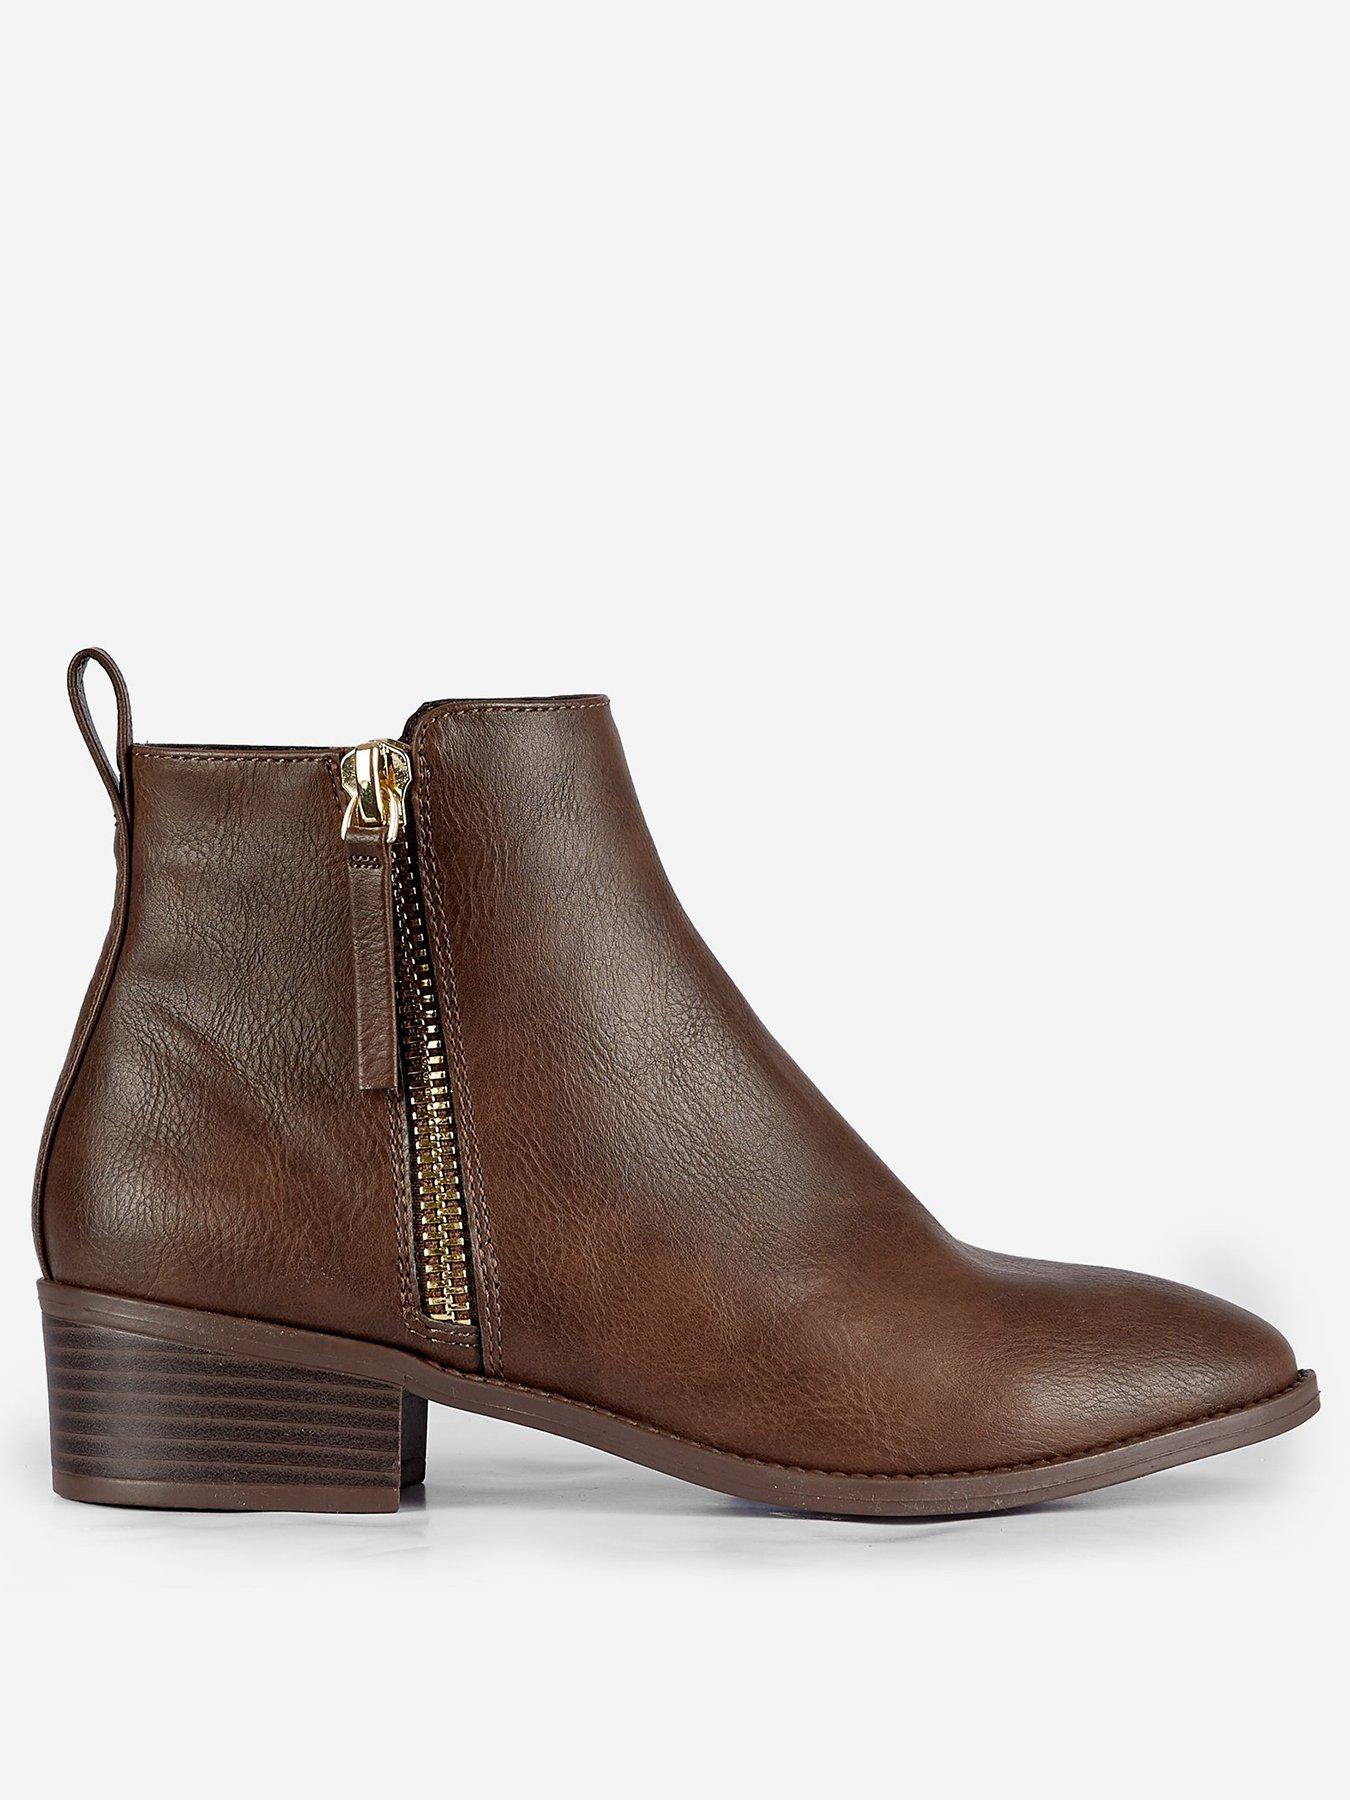 dorothy perkins ankle boots sale